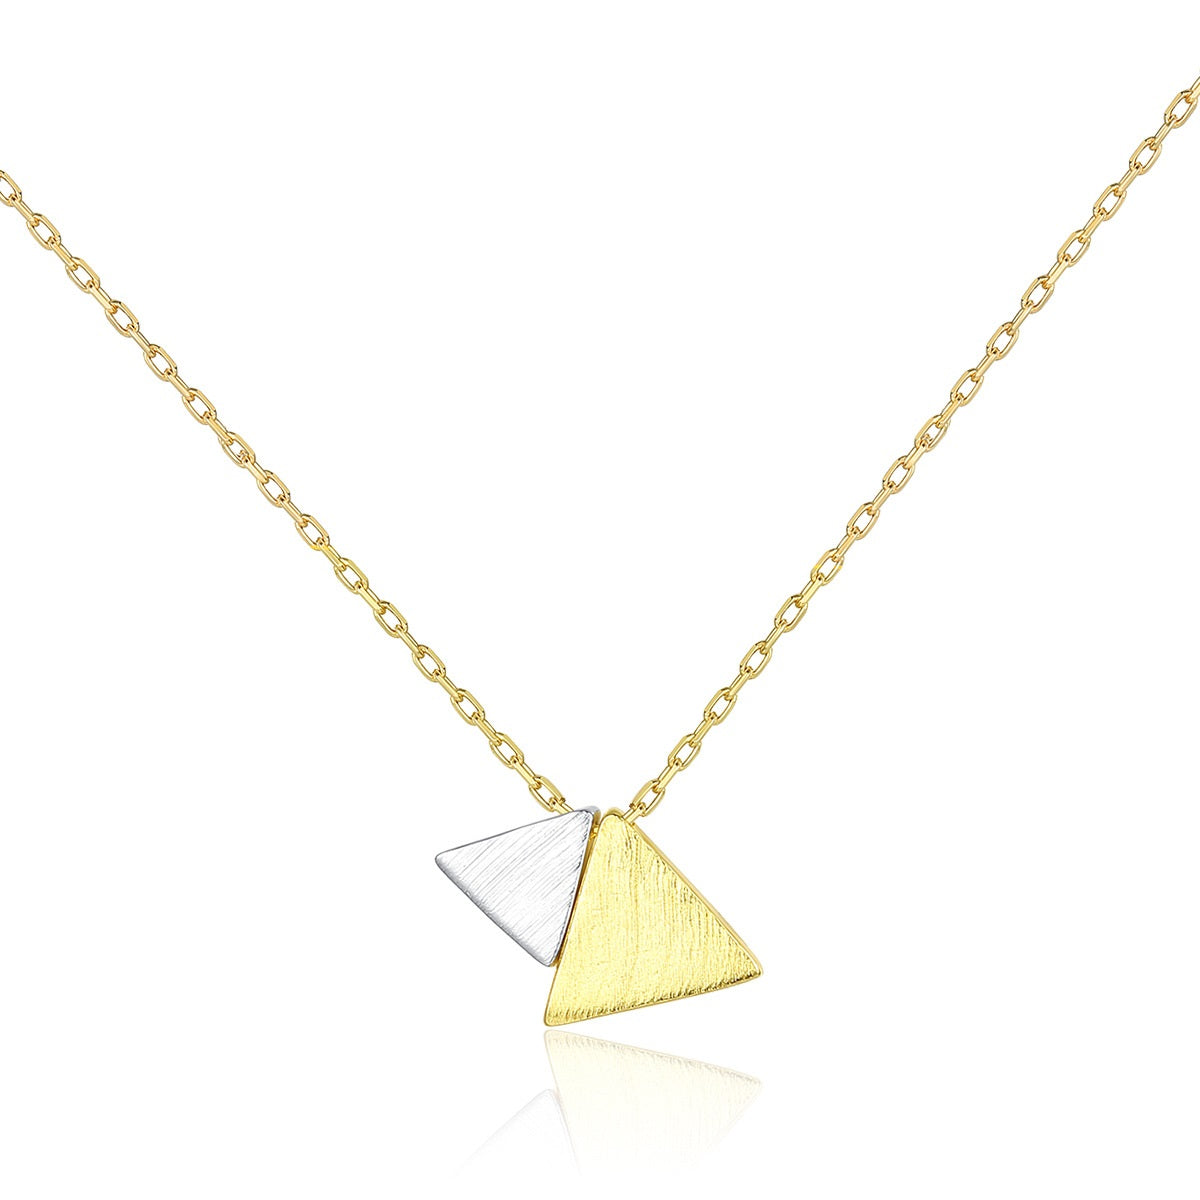 A Mid-ancient Classic Style Necklace S925 Silver Pendant Triangle Elegant Graceful Jewelry on a chain from Maramalive™.